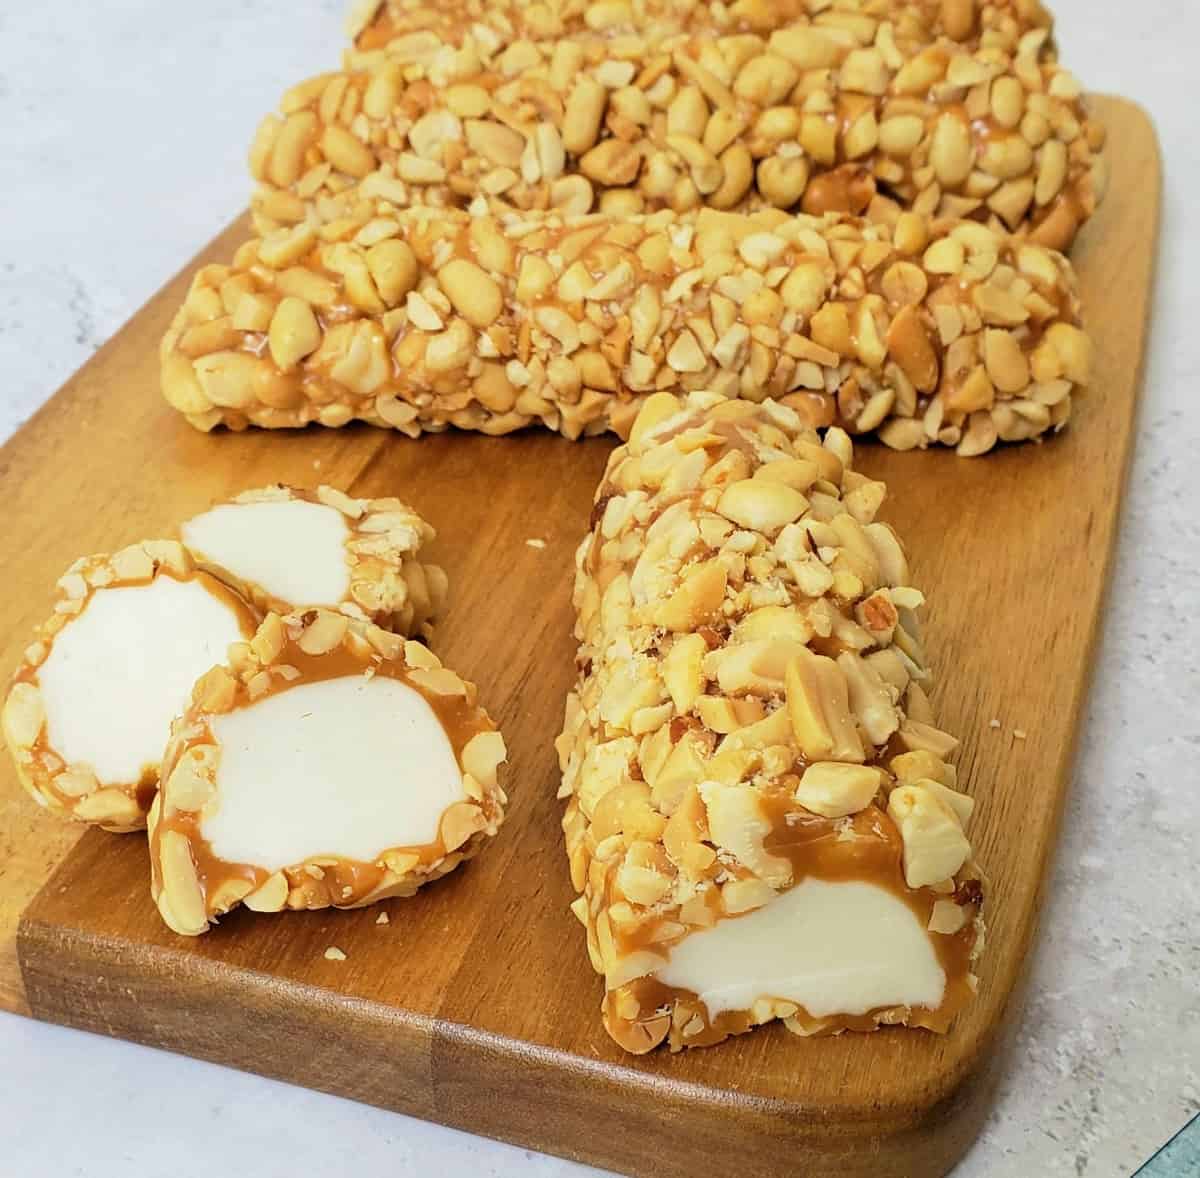 Peanut and caramel covered nougat logs on a wooden board.